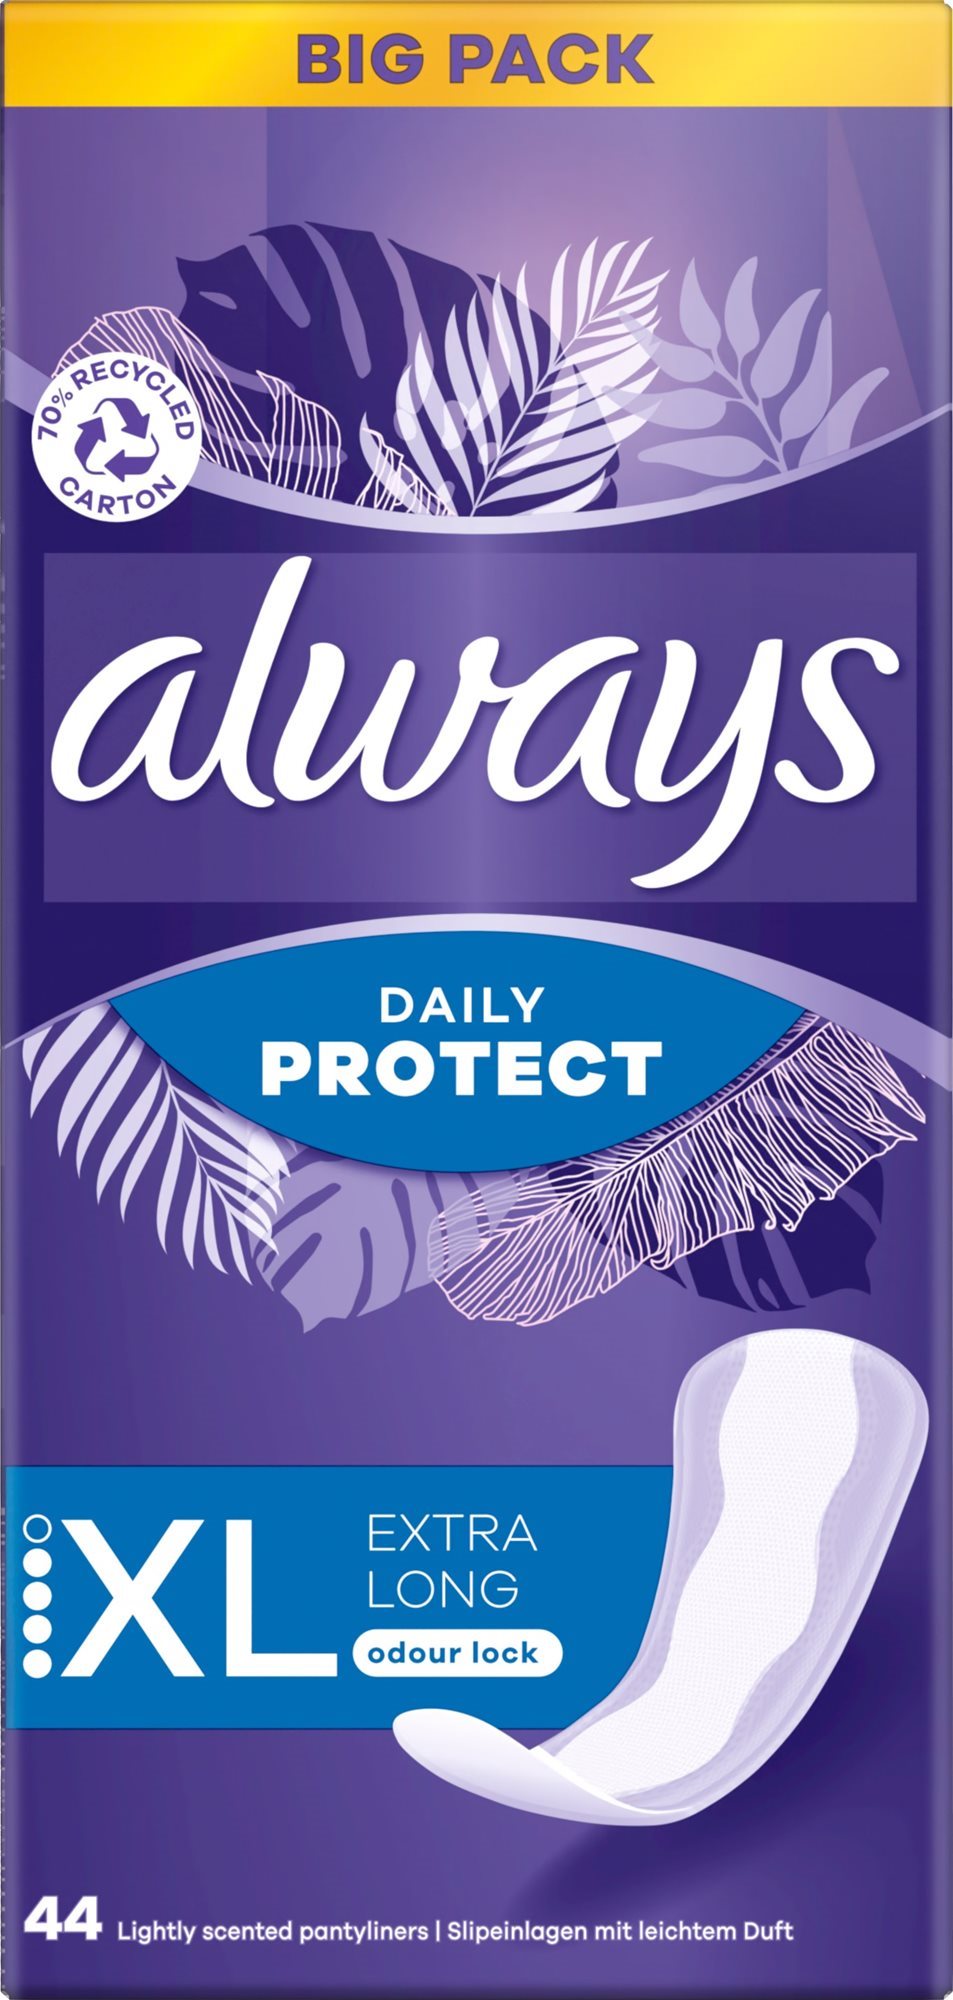 ALWAYS Dailies Extra Protect Long Plus Intimate 44 db